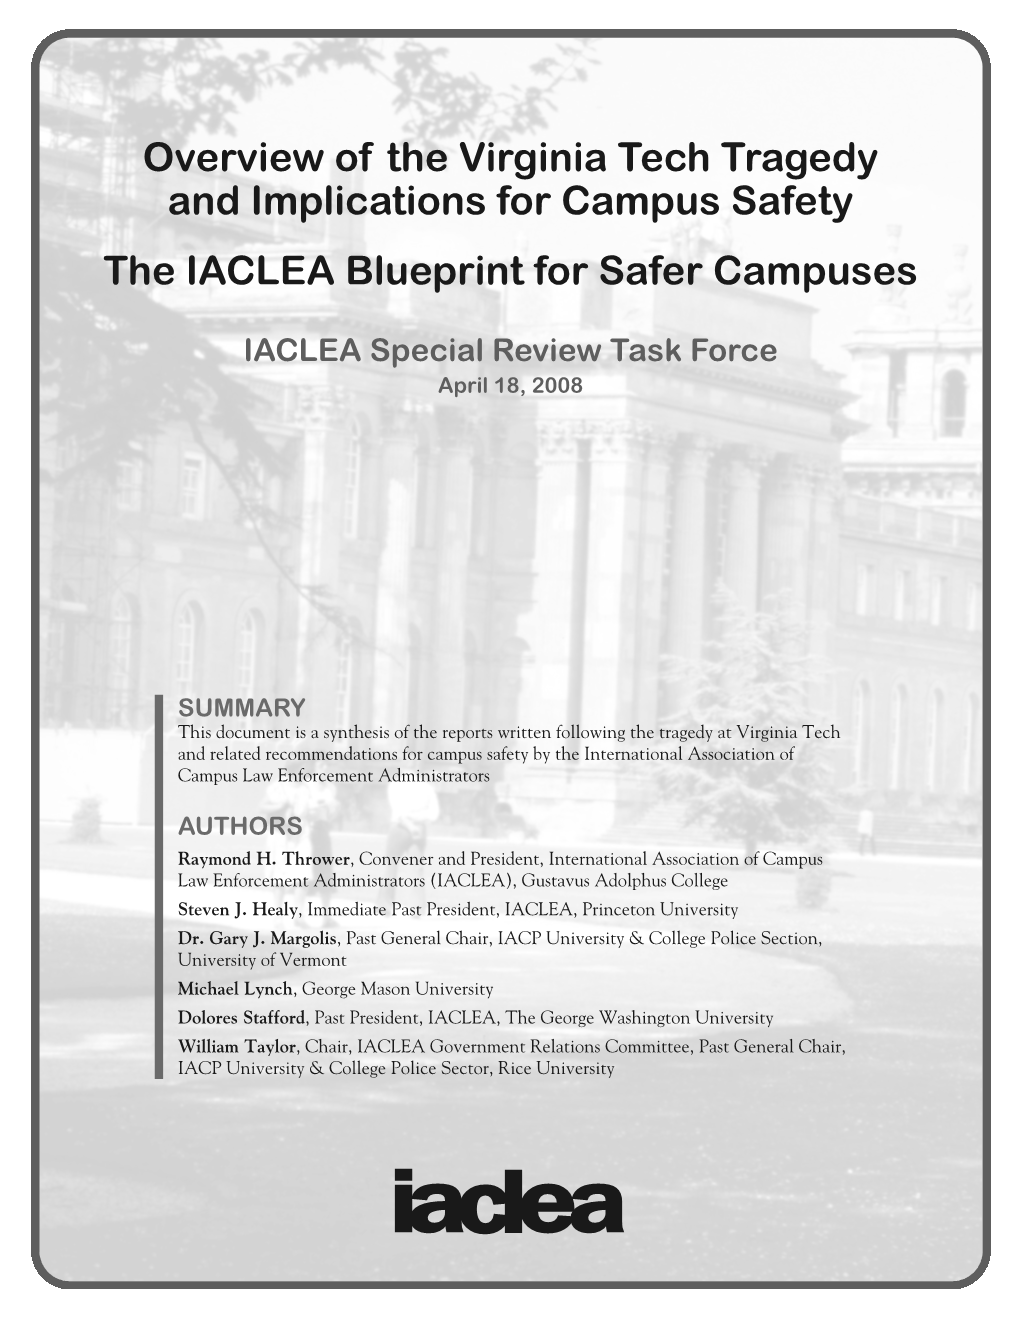 IACLEA Blueprint for Safer Campuses